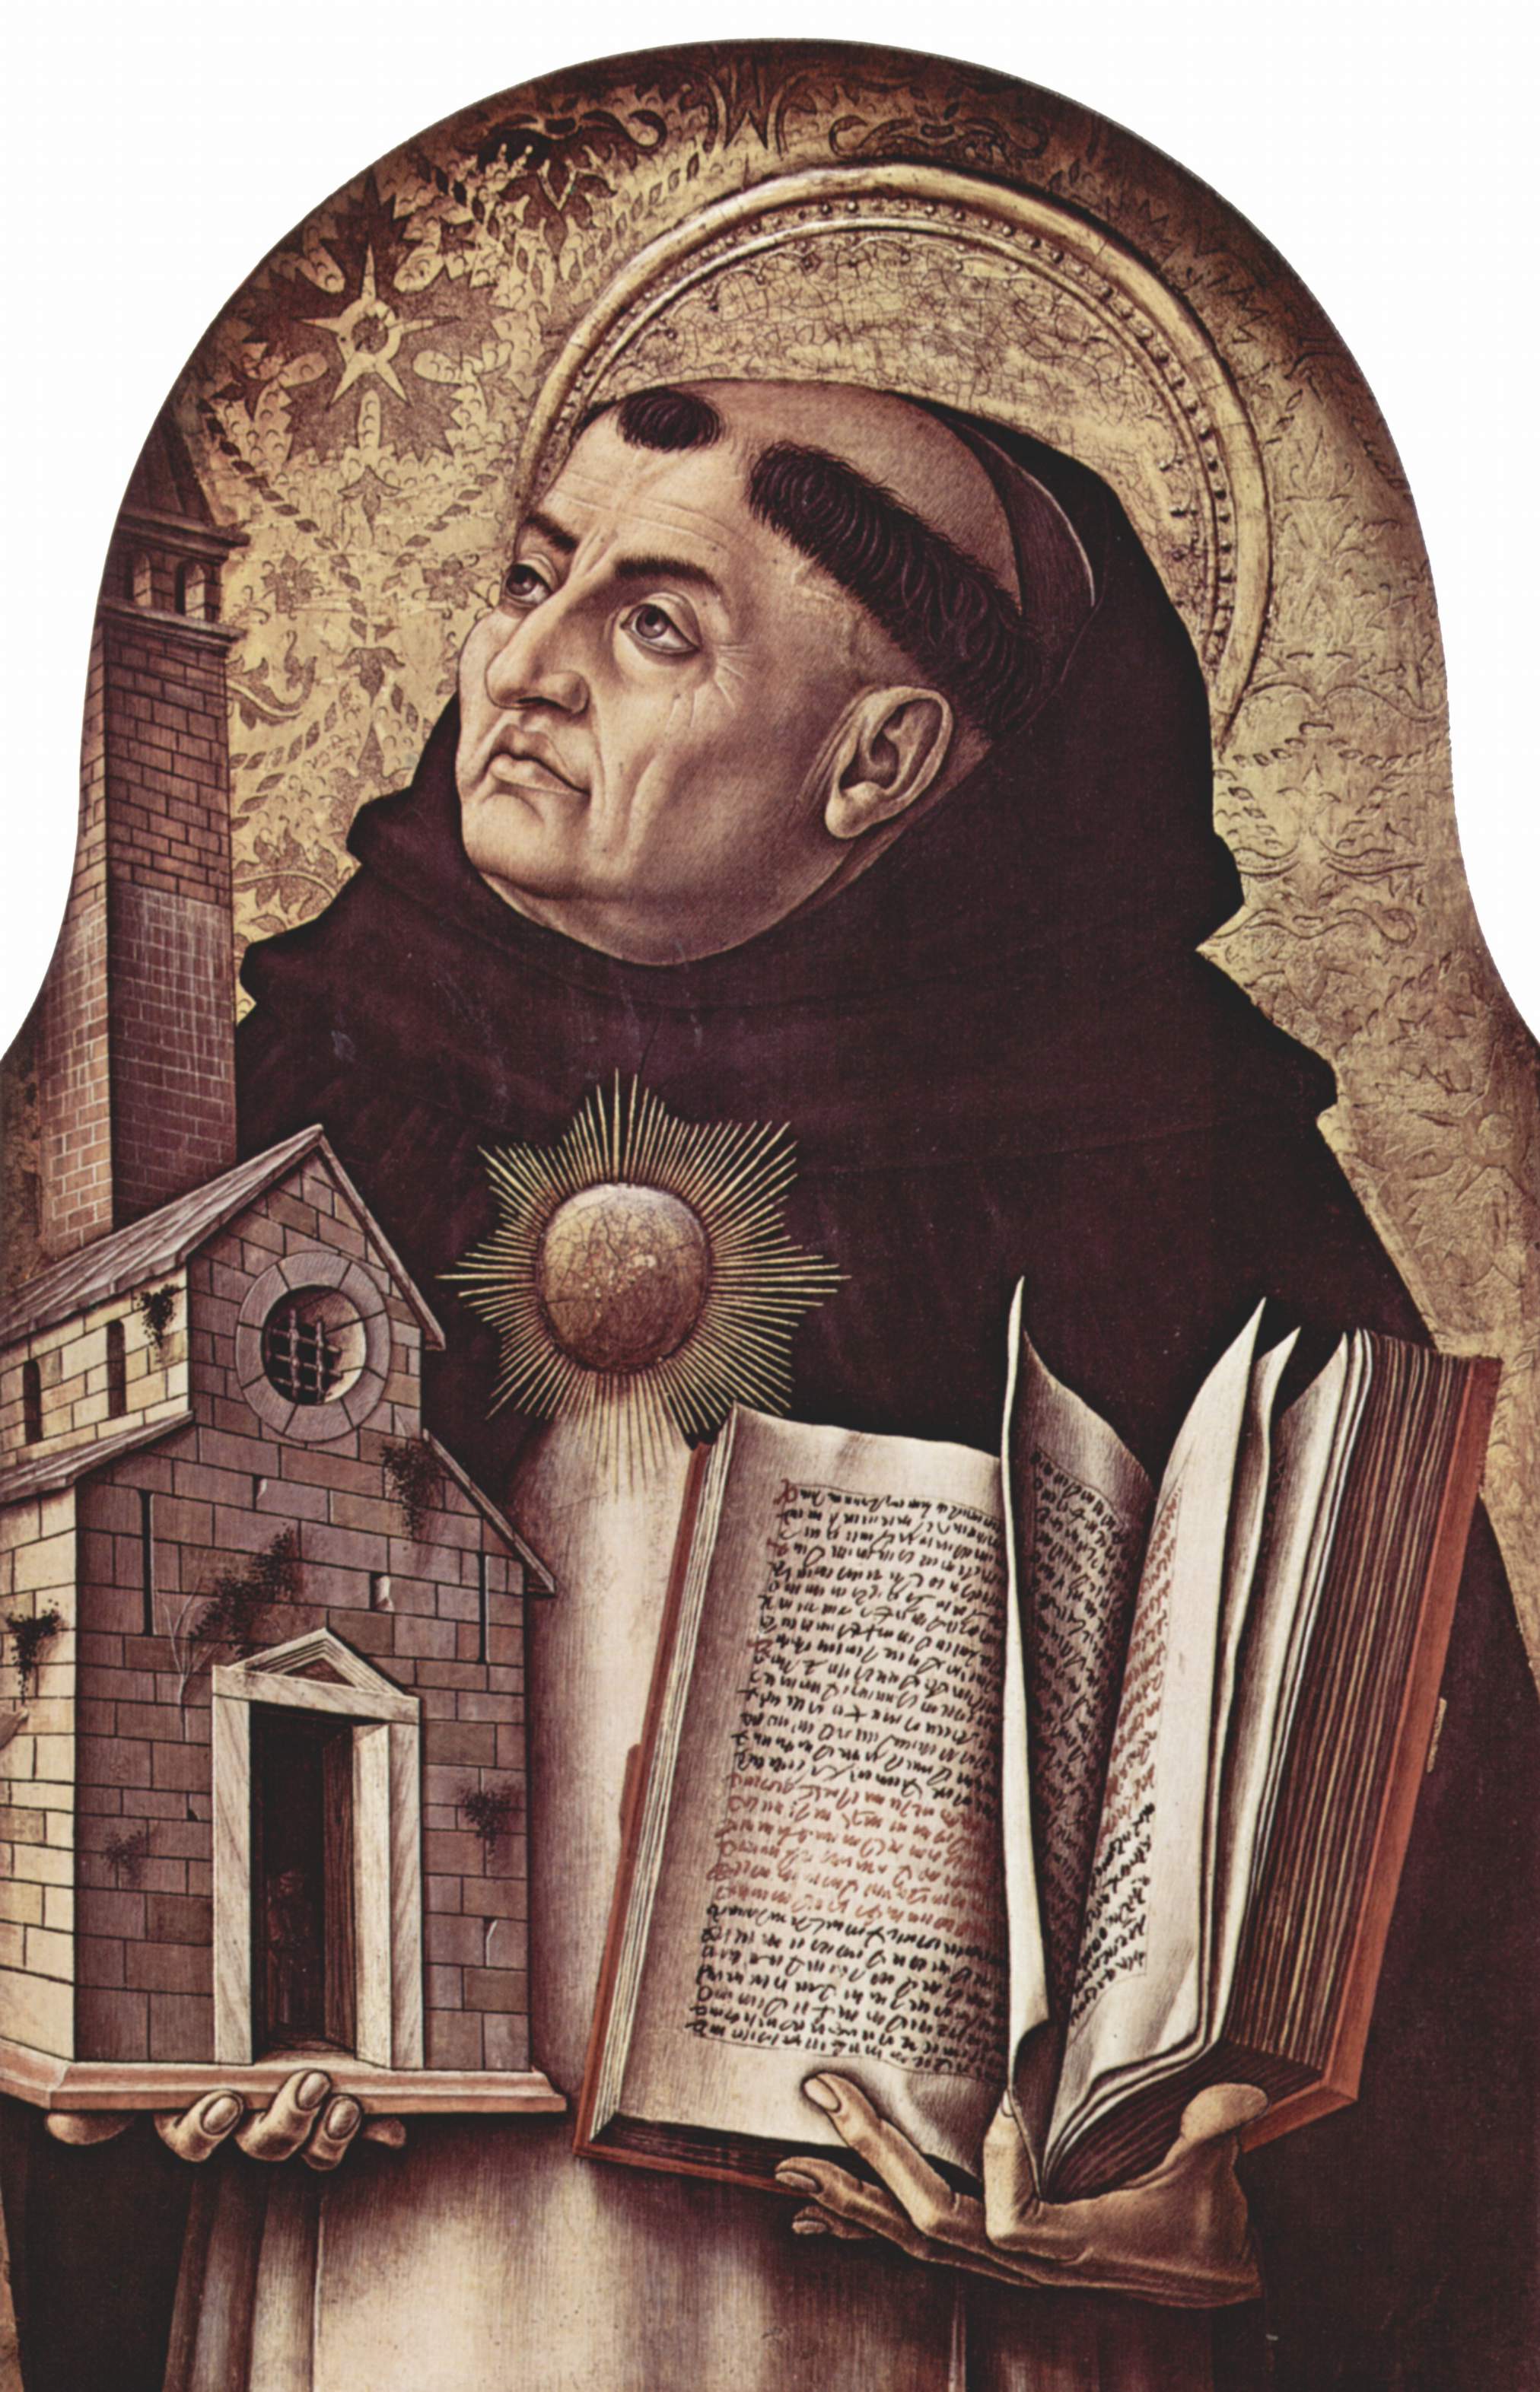 St. Thomas Aquinas –&nbsp;An altarpiece in Ascoli Piceno, Italy, by Carlo Crivelli&nbsp;(15th century)By Carlo Crivelli - Via The Yorck Project (2002) 10.000 Meisterwerke der Malerei (DVD-ROM), distributed by DIRECTMEDIA Publishing GmbH. ISBN: 39361…